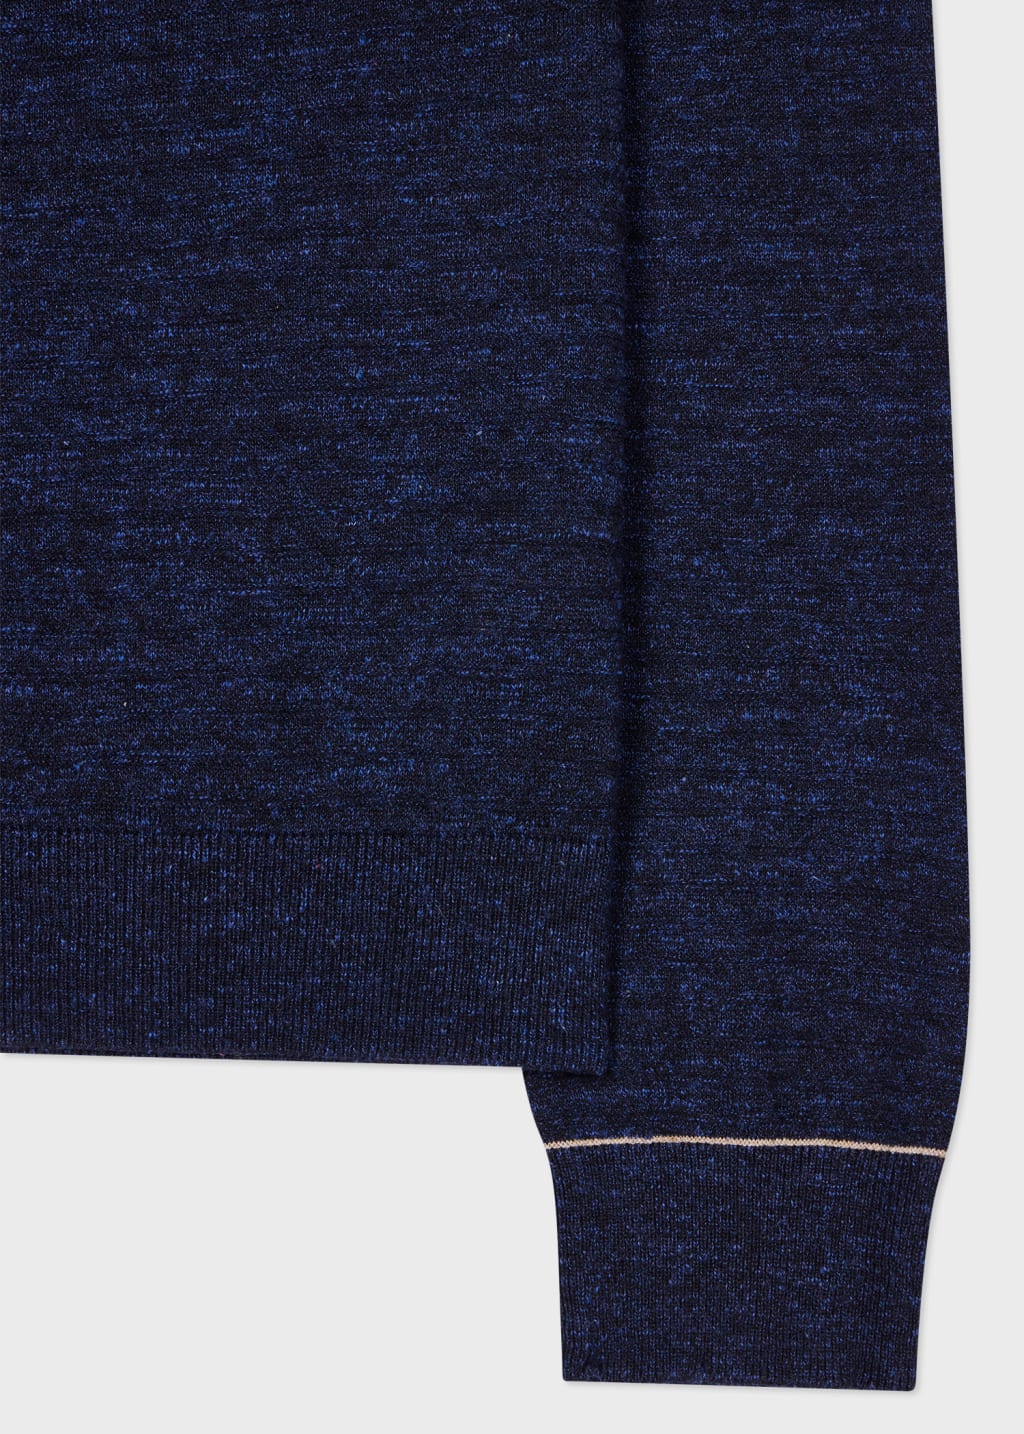 Detail View - Navy Cotton-Linen Textured Sweater Paul Smith